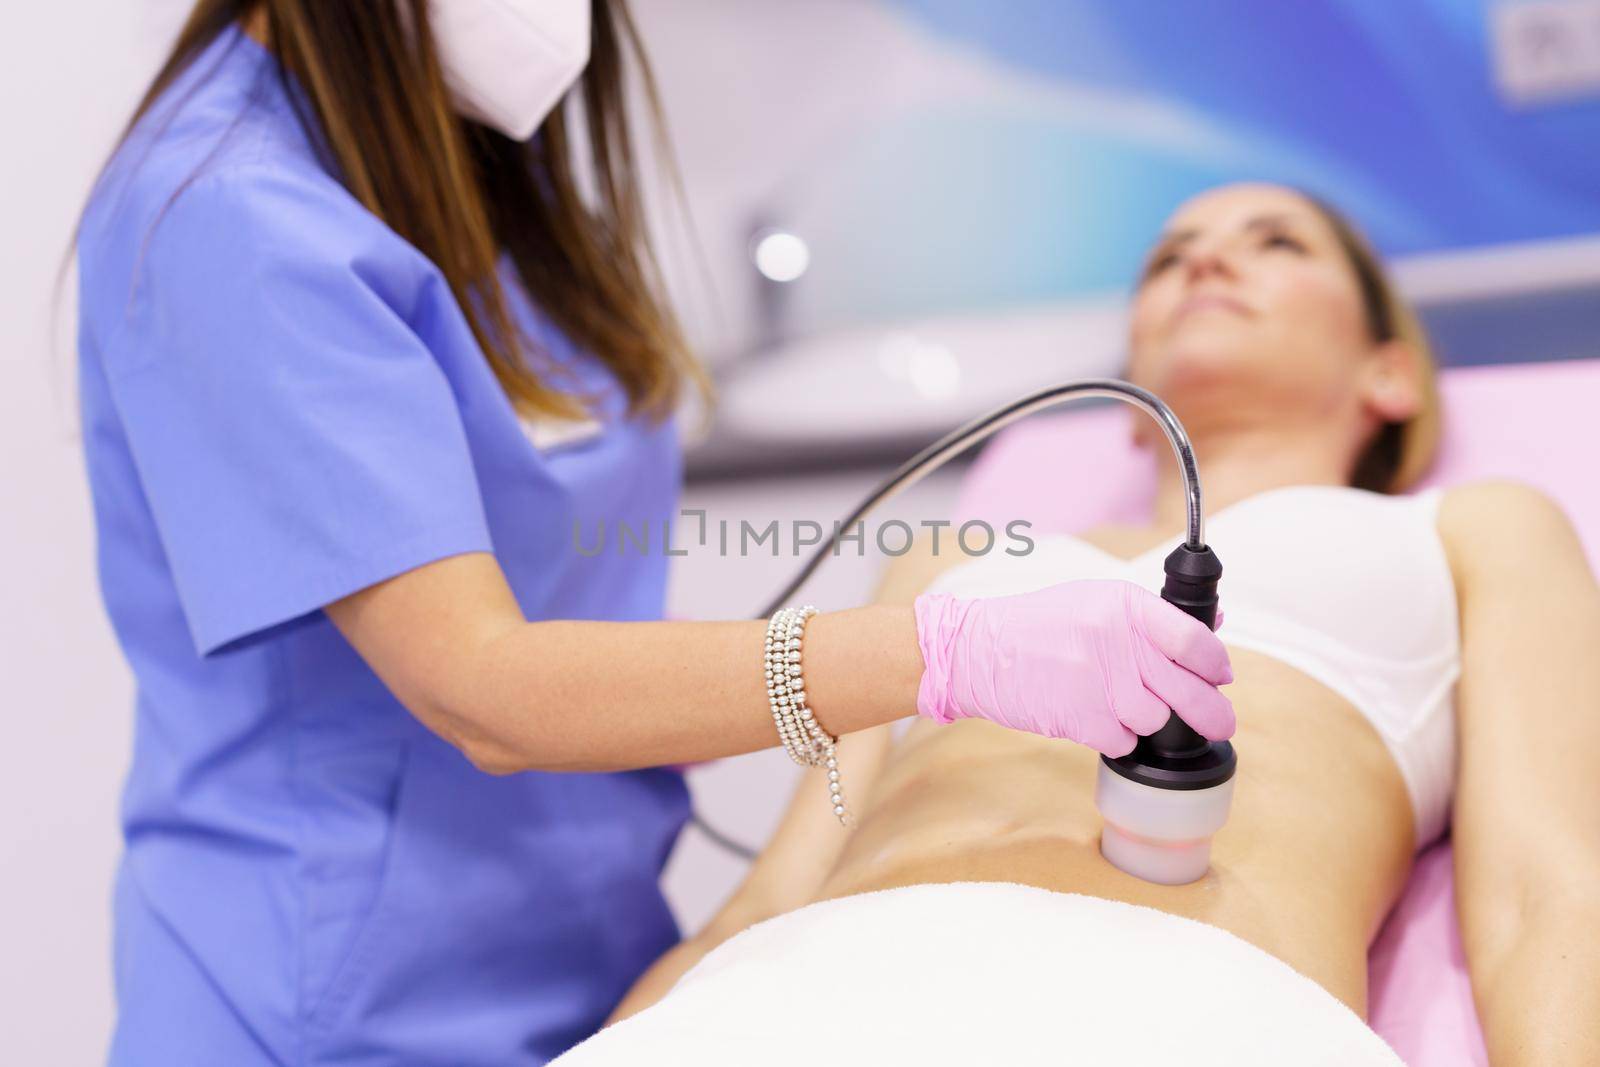 Middle-aged woman receiving anti-cellulite treatment with radiofrequency machine in a beauty center.